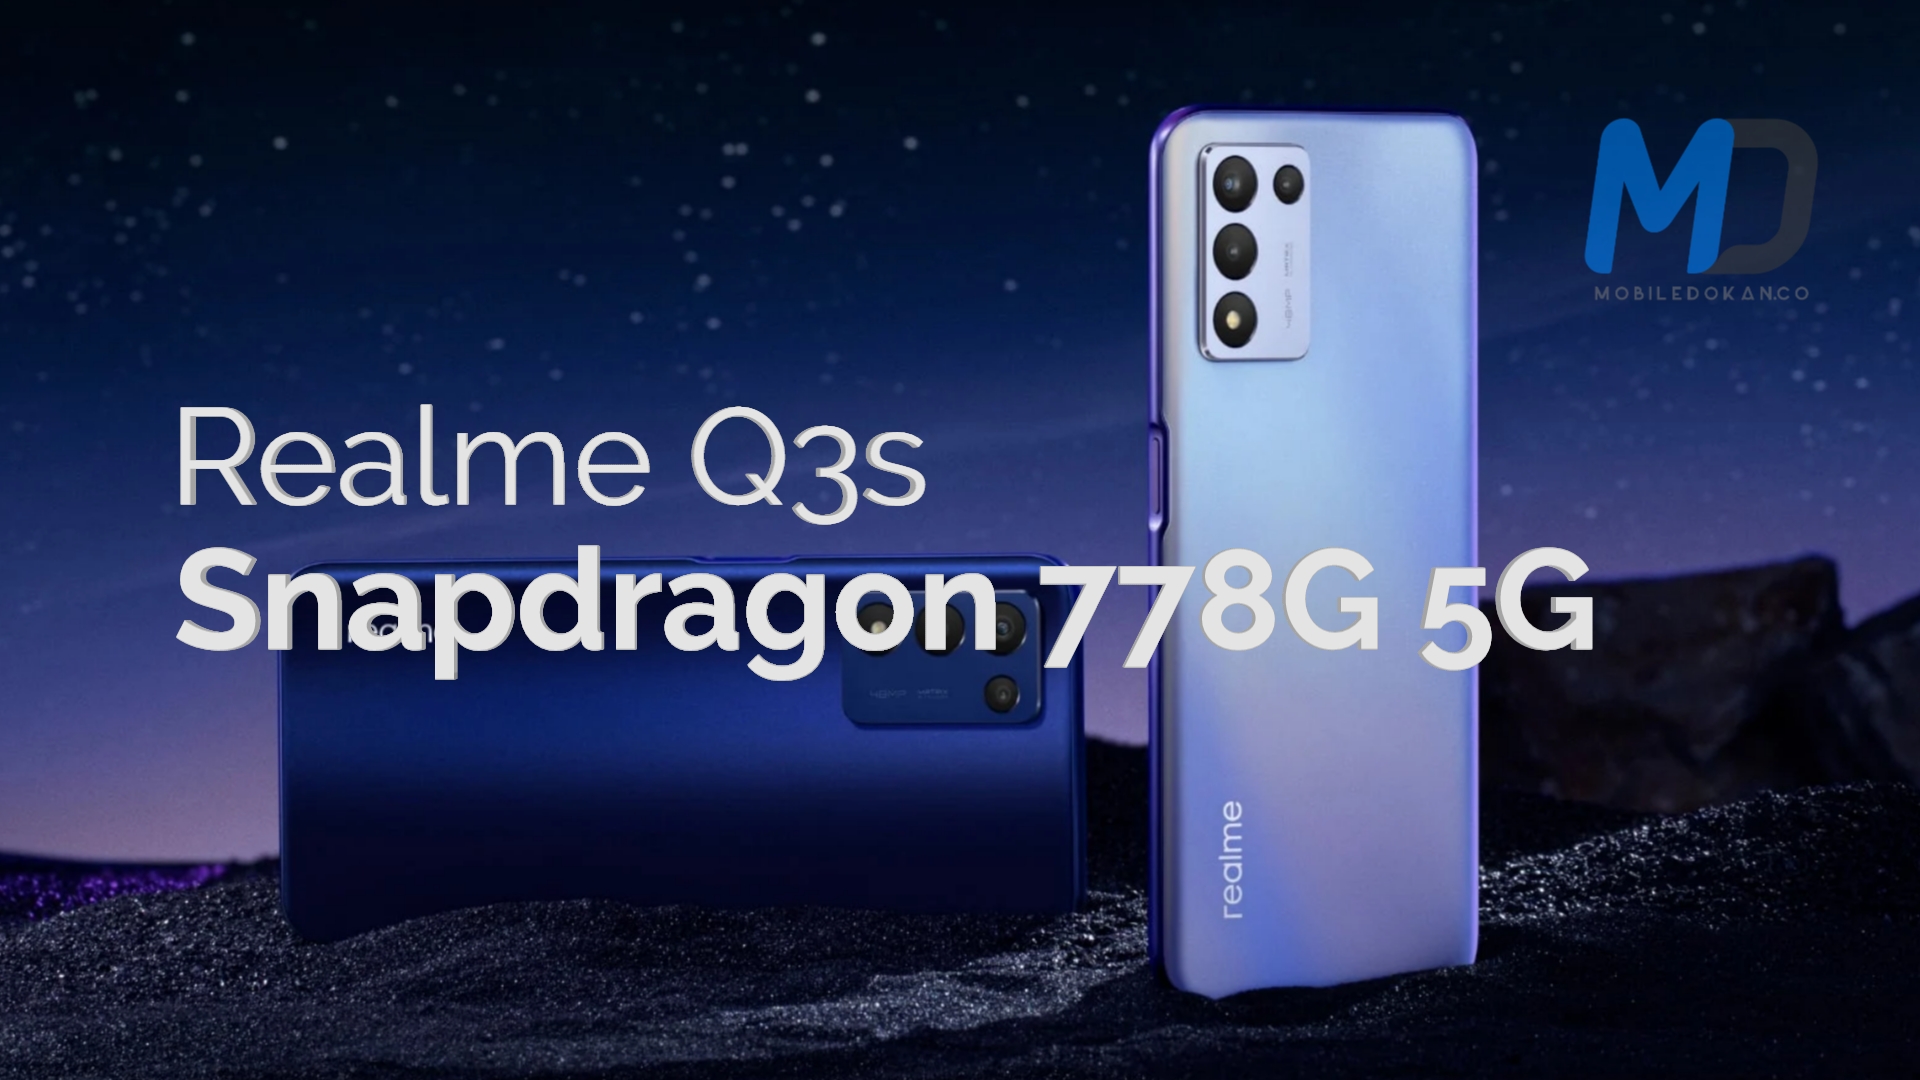 Realme Q3s launched Snapdragon 778G 5G with a 144Hz display